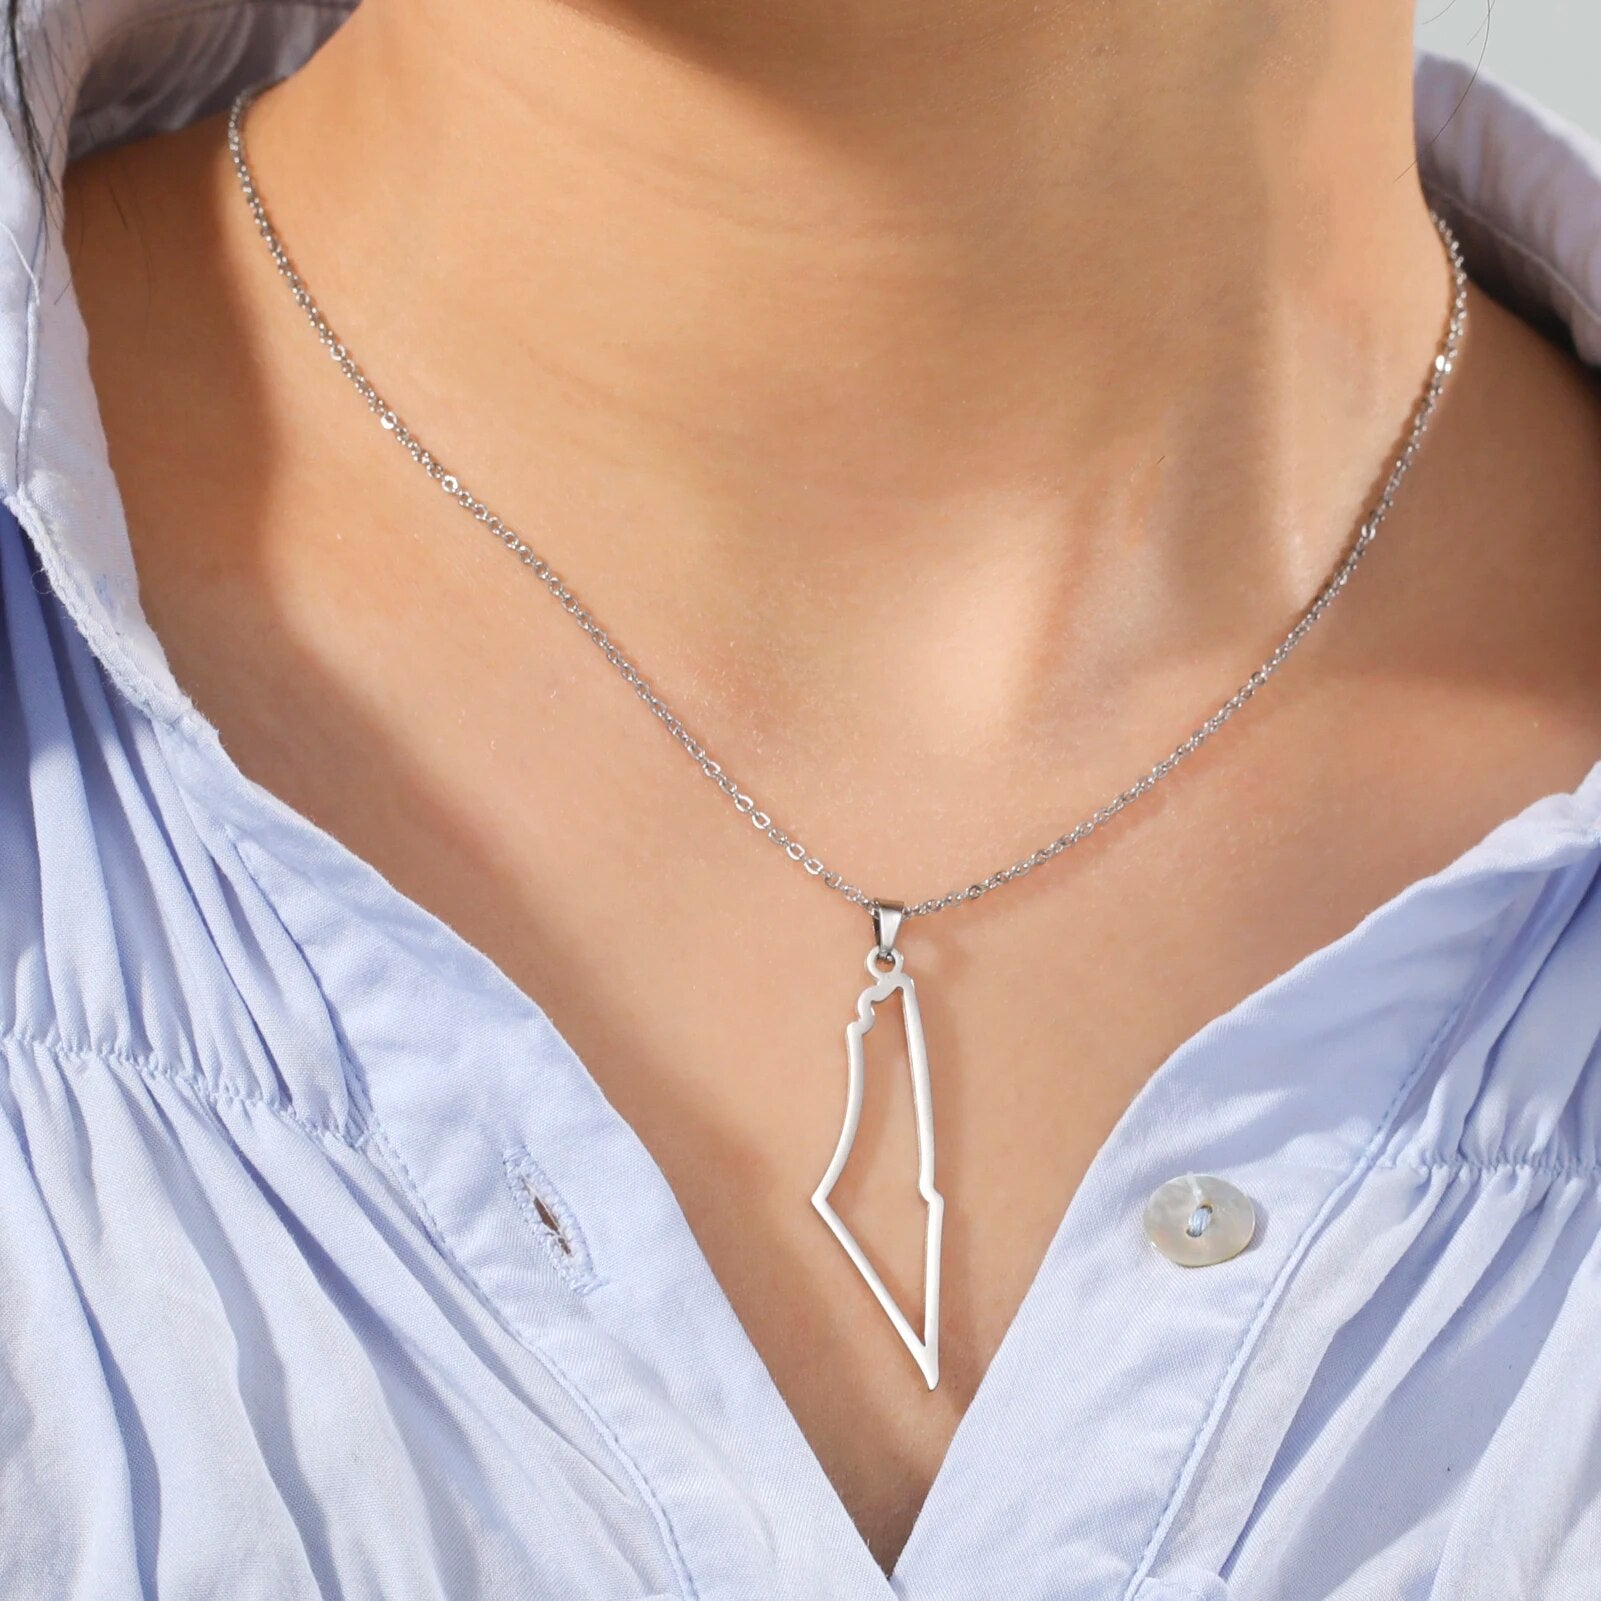 The silhouette of Israel Necklace